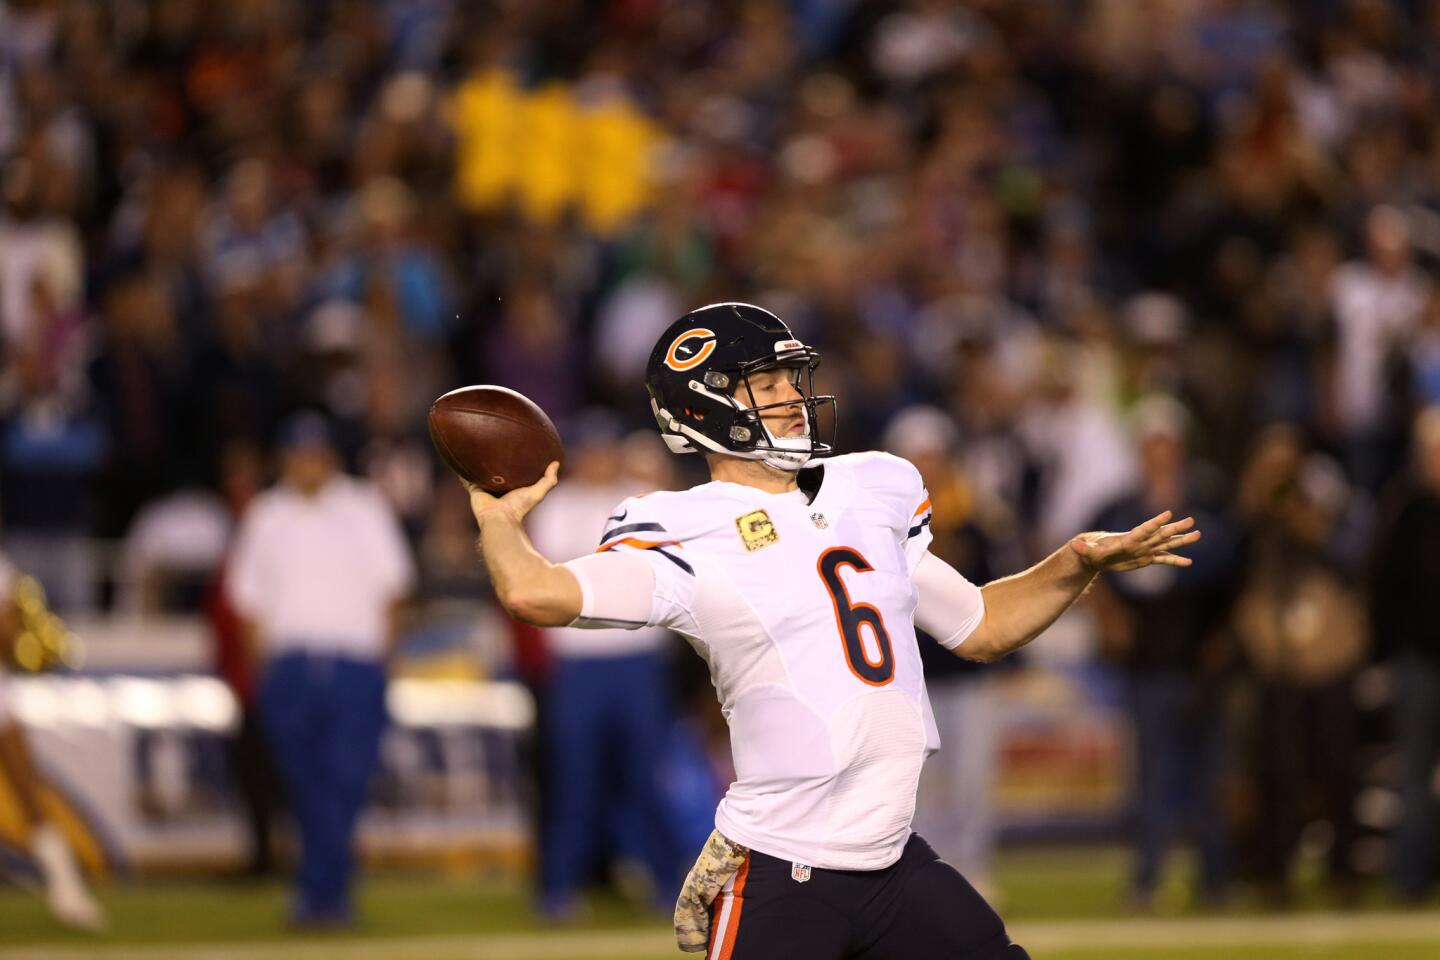 Bears quarterback Jay Cutler throws a long pass in the second quarter against the Chargers.